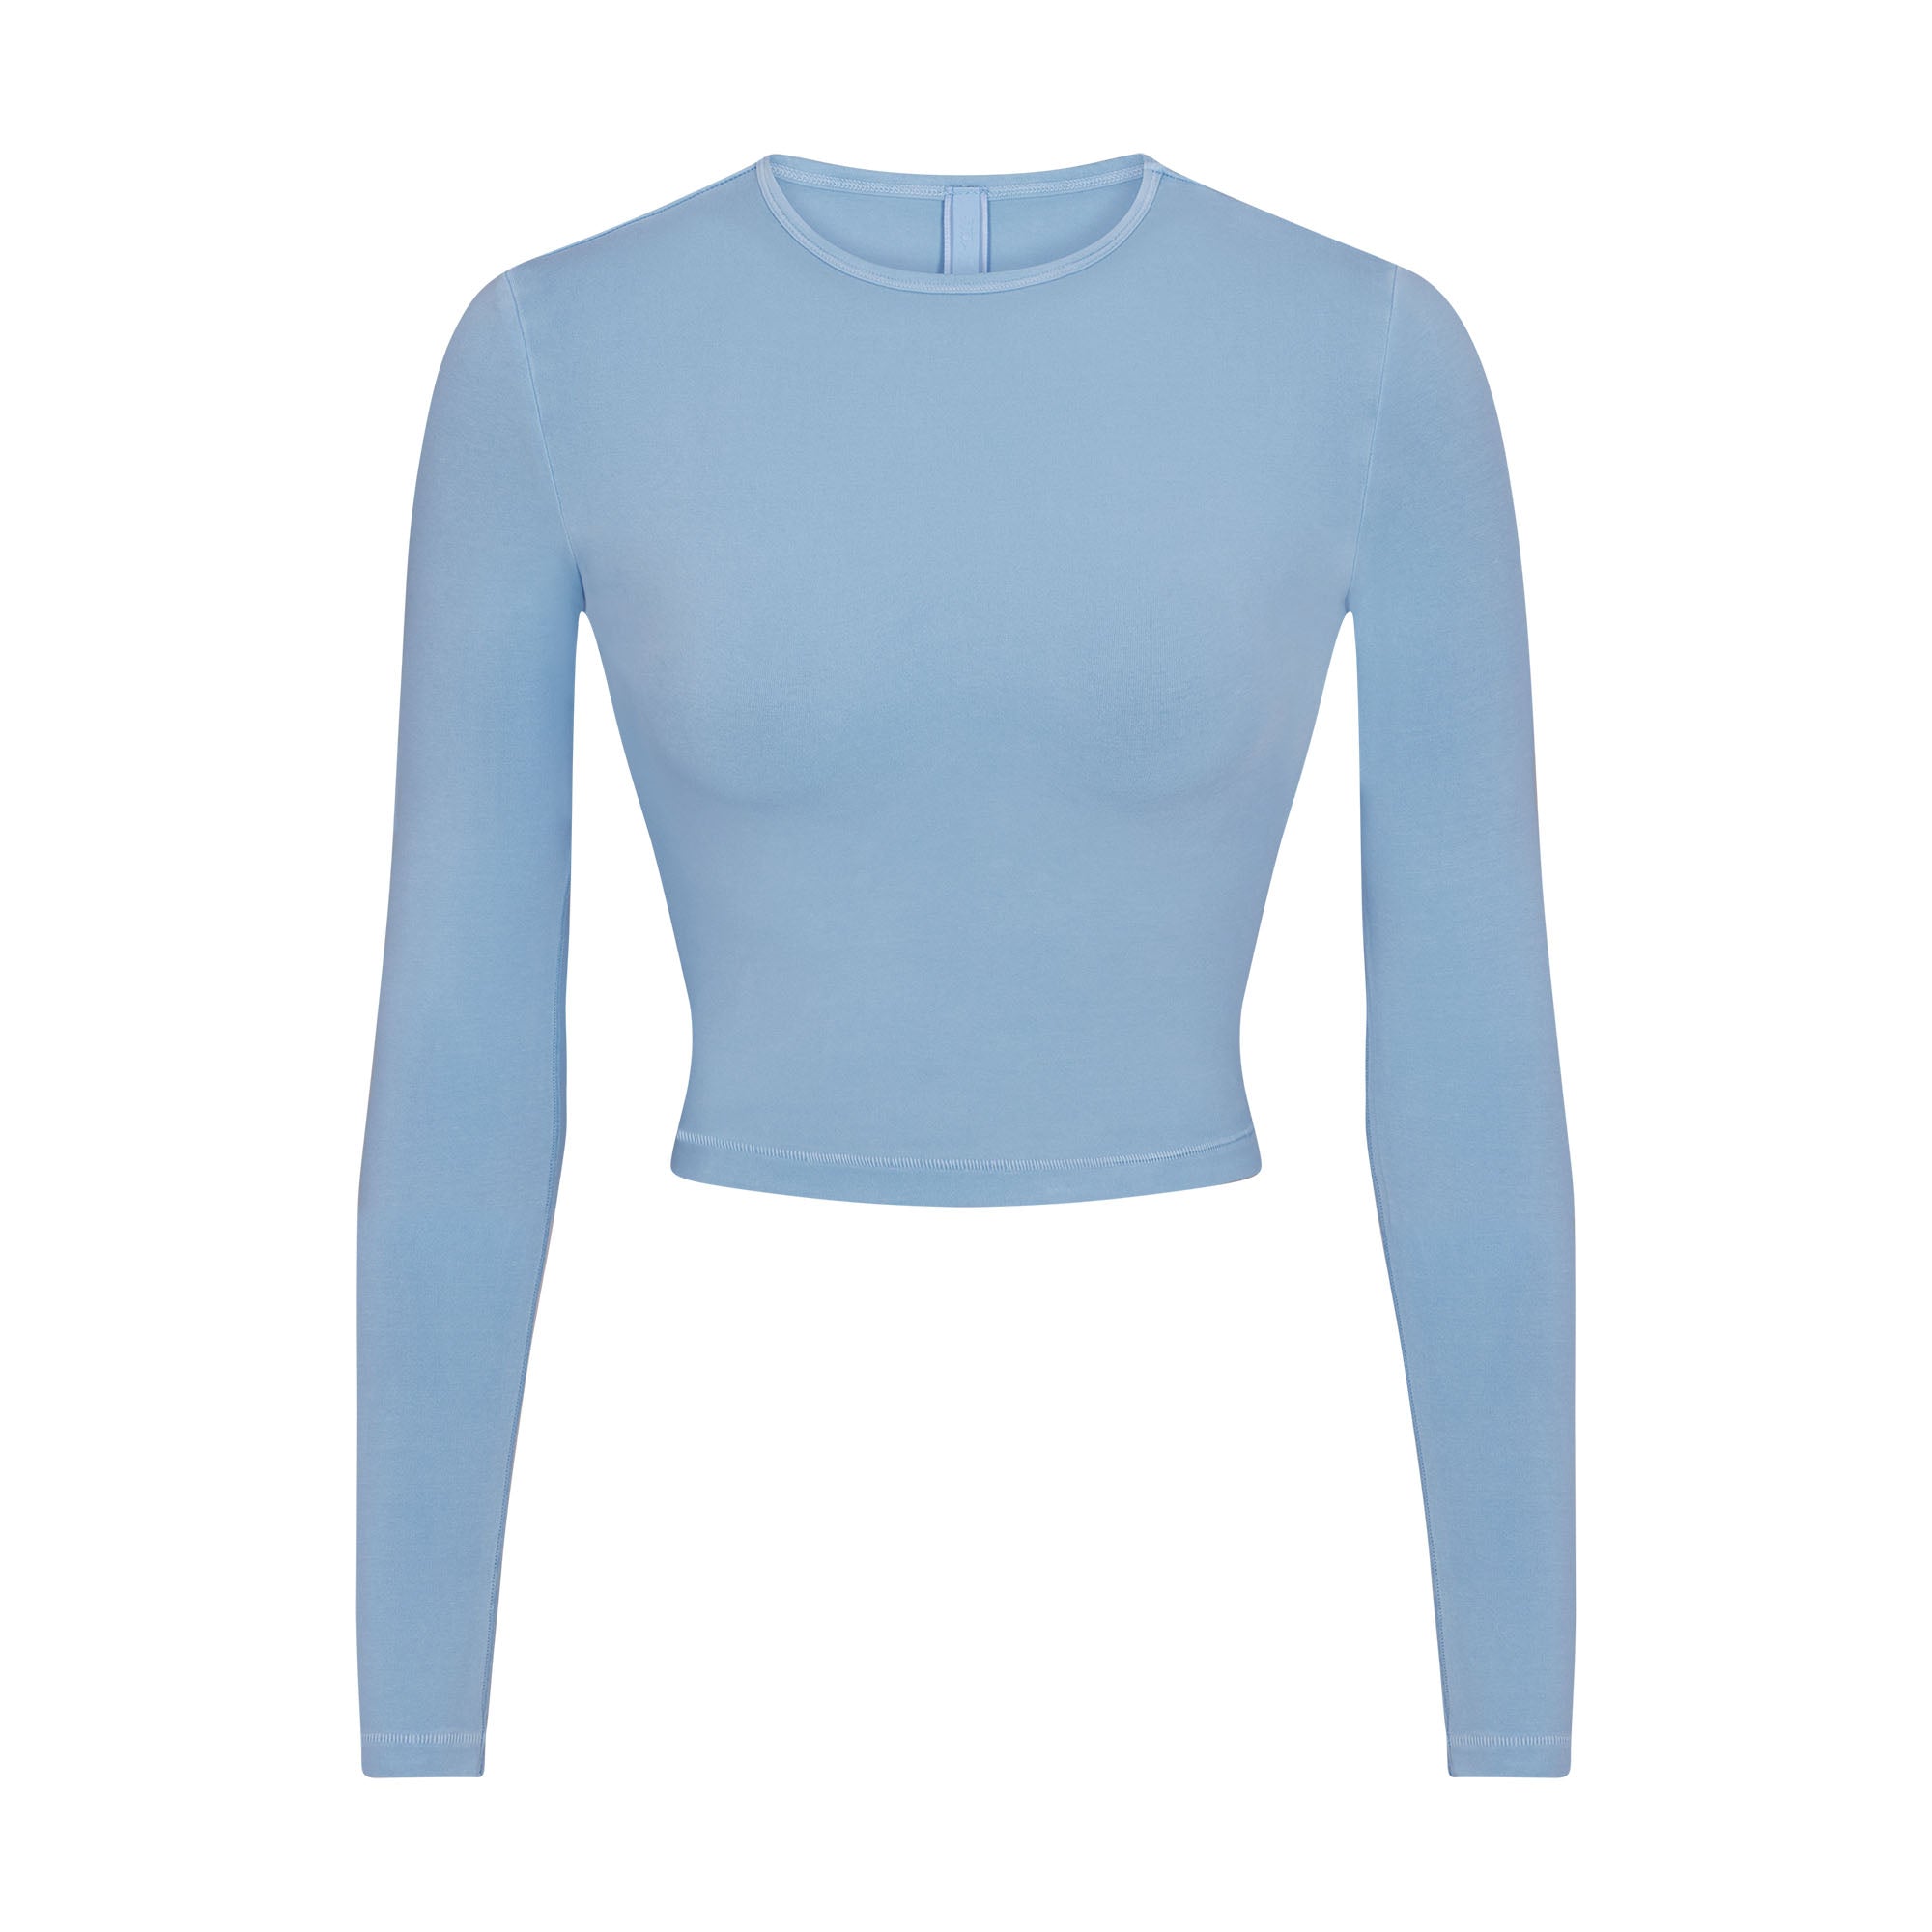 NEW VINTAGE CROPPED LONG SLEEVE T-SHIRT | IRIS BLUE - NEW VINTAGE ...